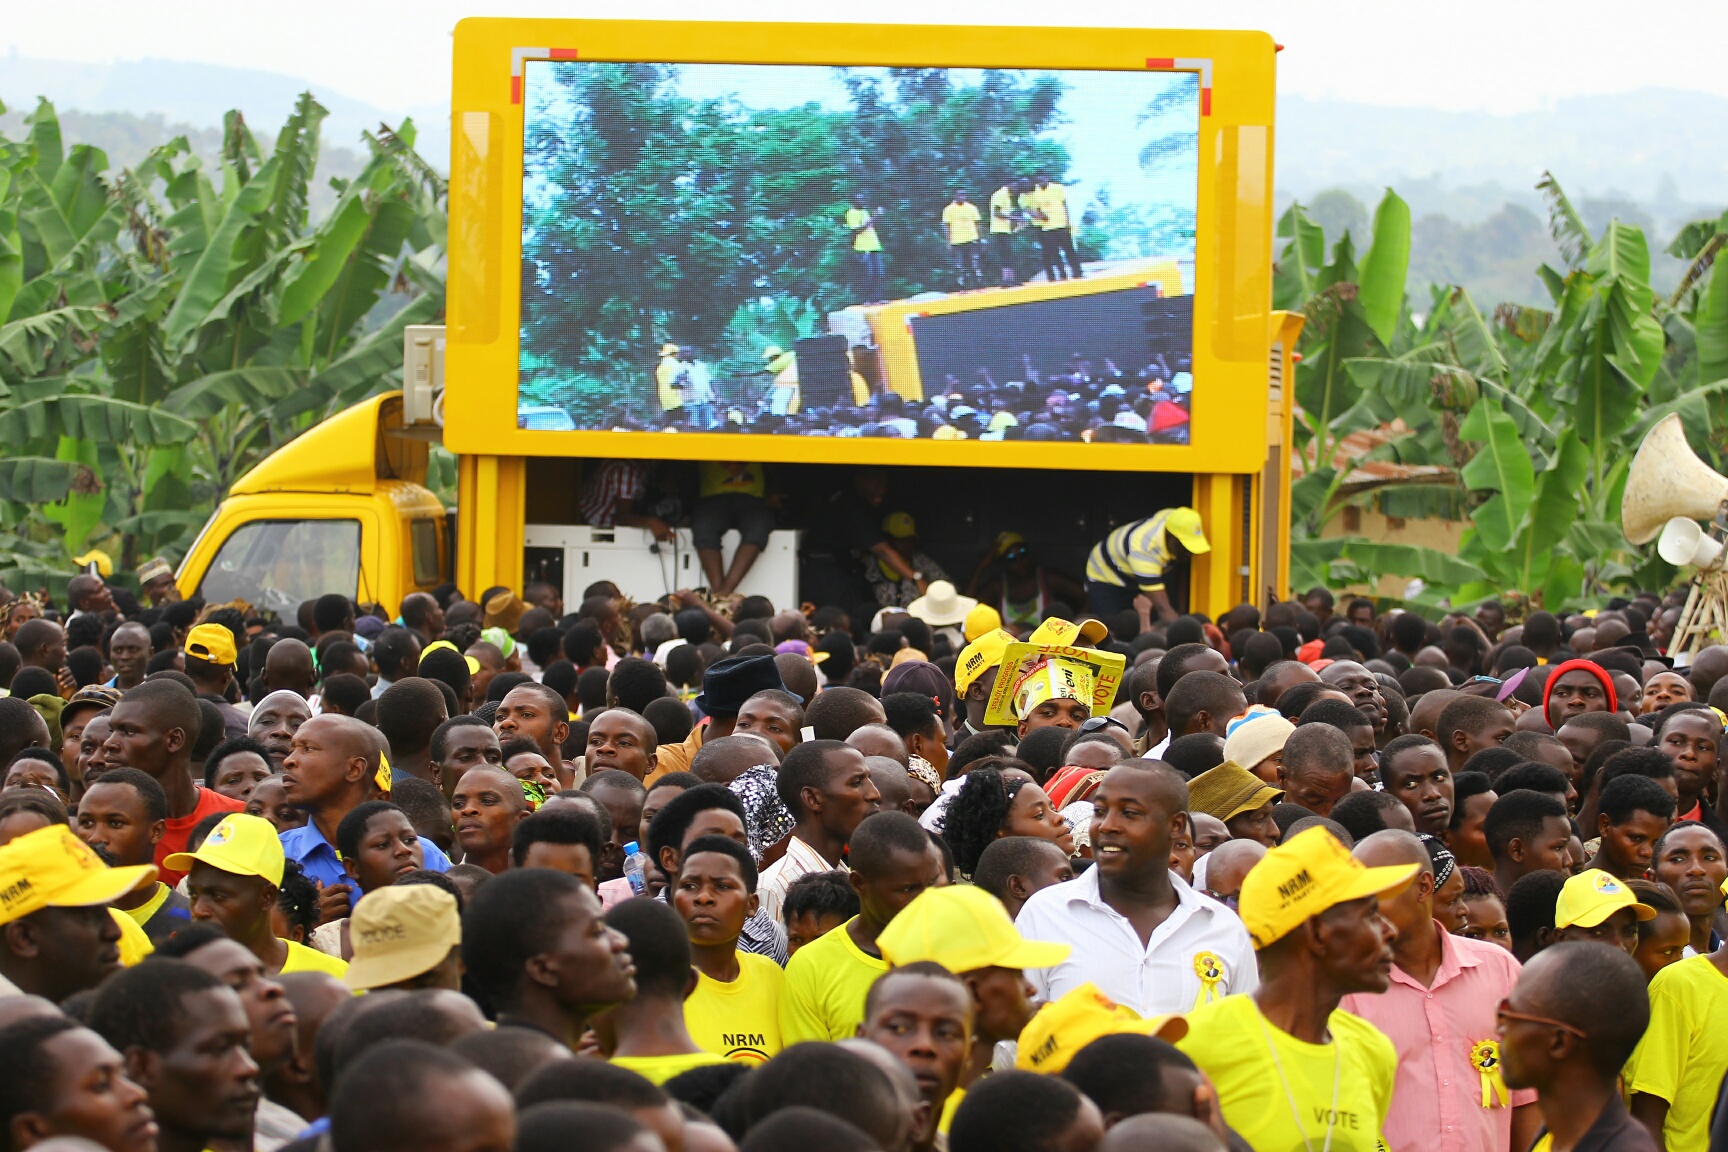 One of the trucks relaying the steady progress message of president Museveni.